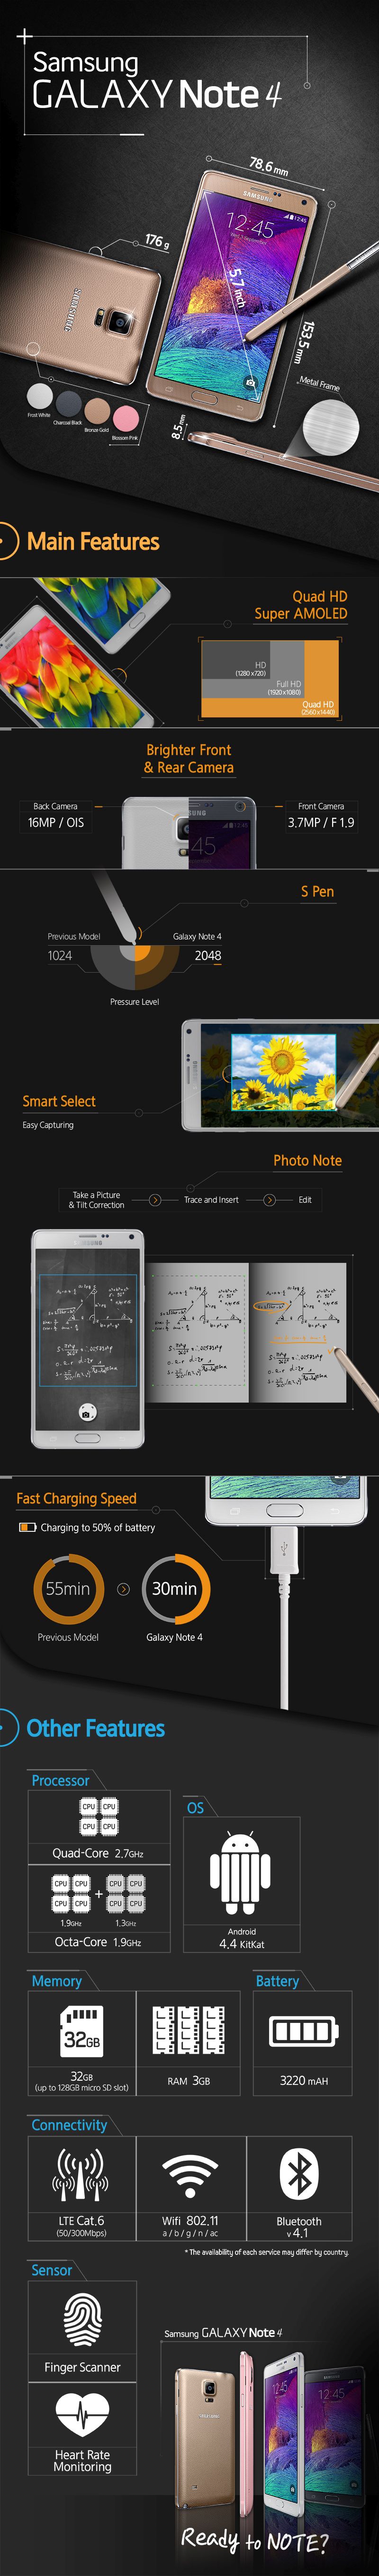 Samsung-Galaxy-Note-4-Infographic